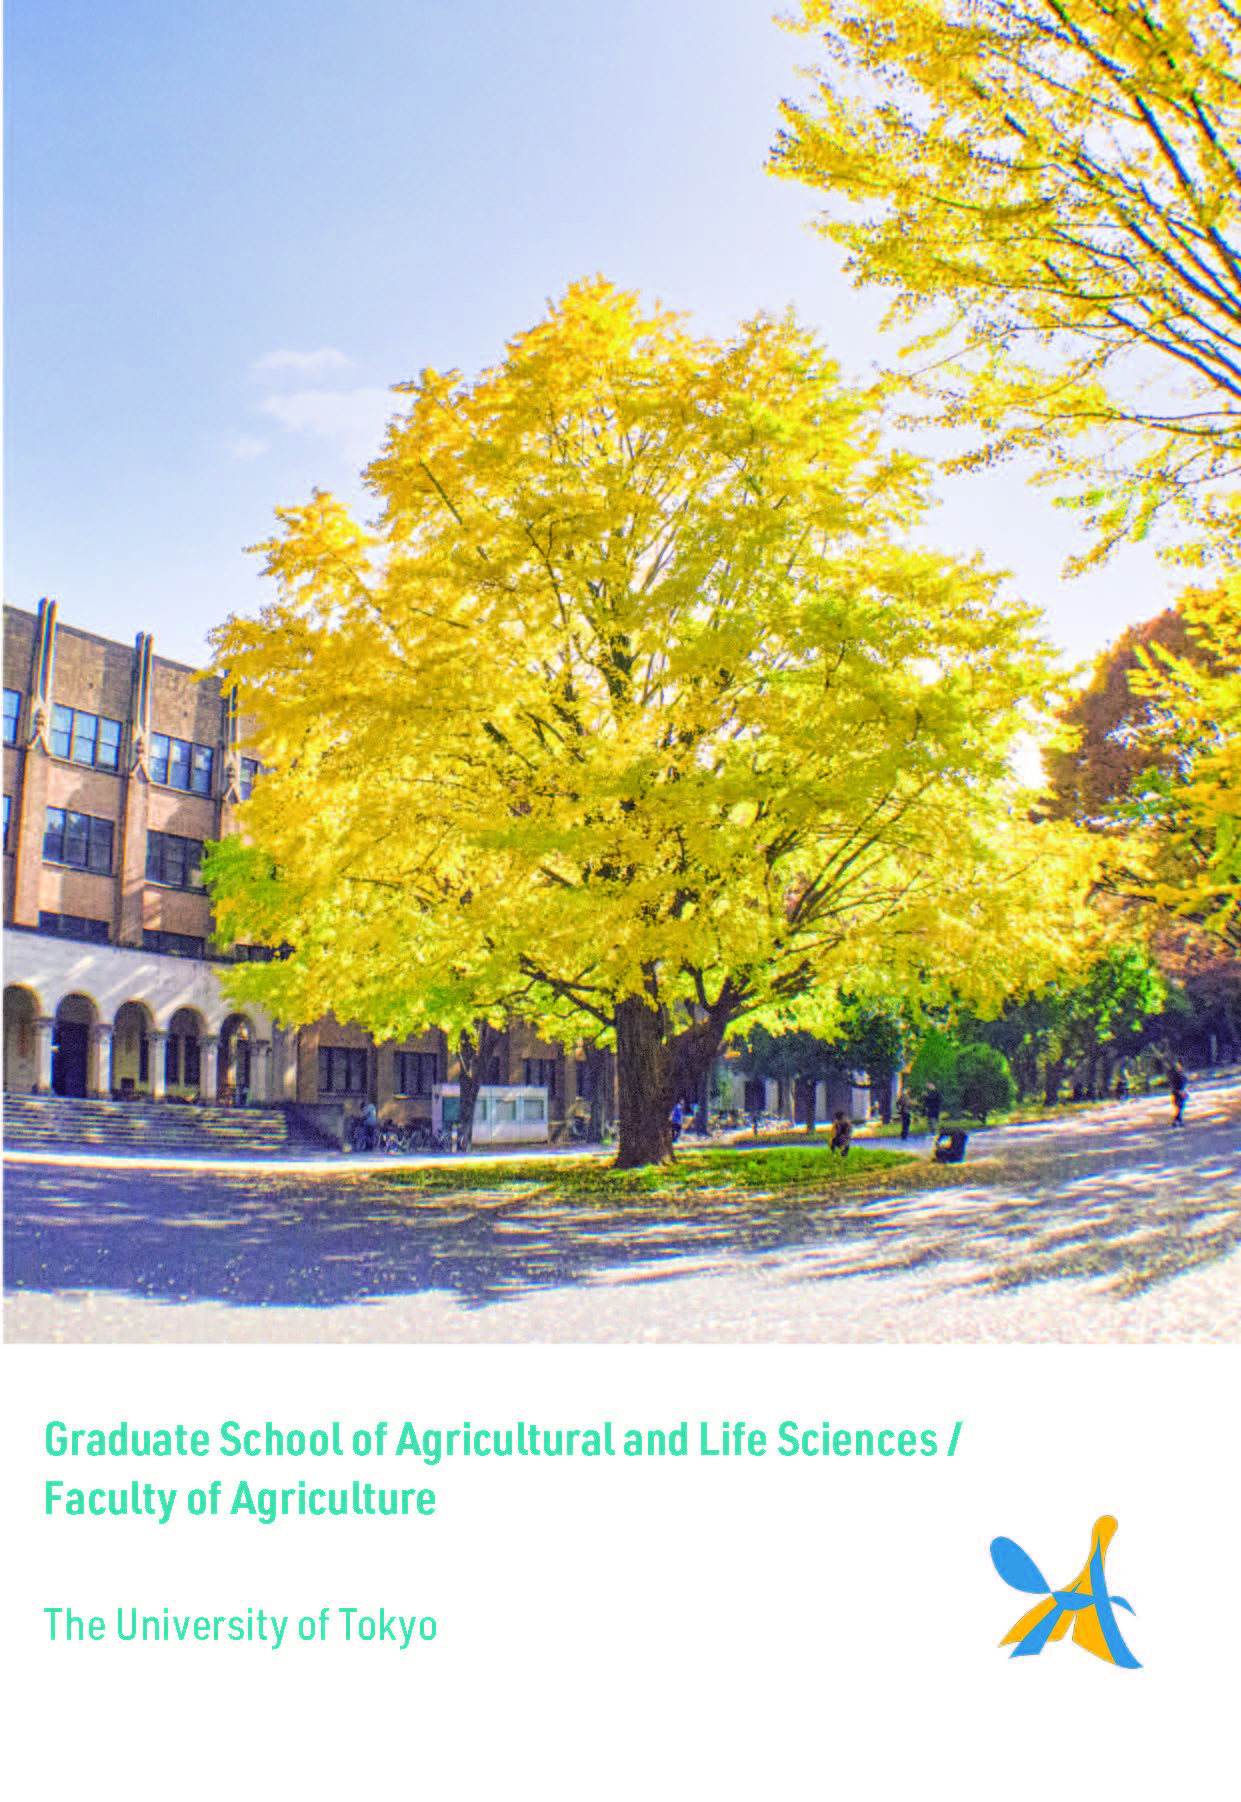 Graduate School of Agricultural and Life Sciences / Falulty of Agriculture The University of Tokyo